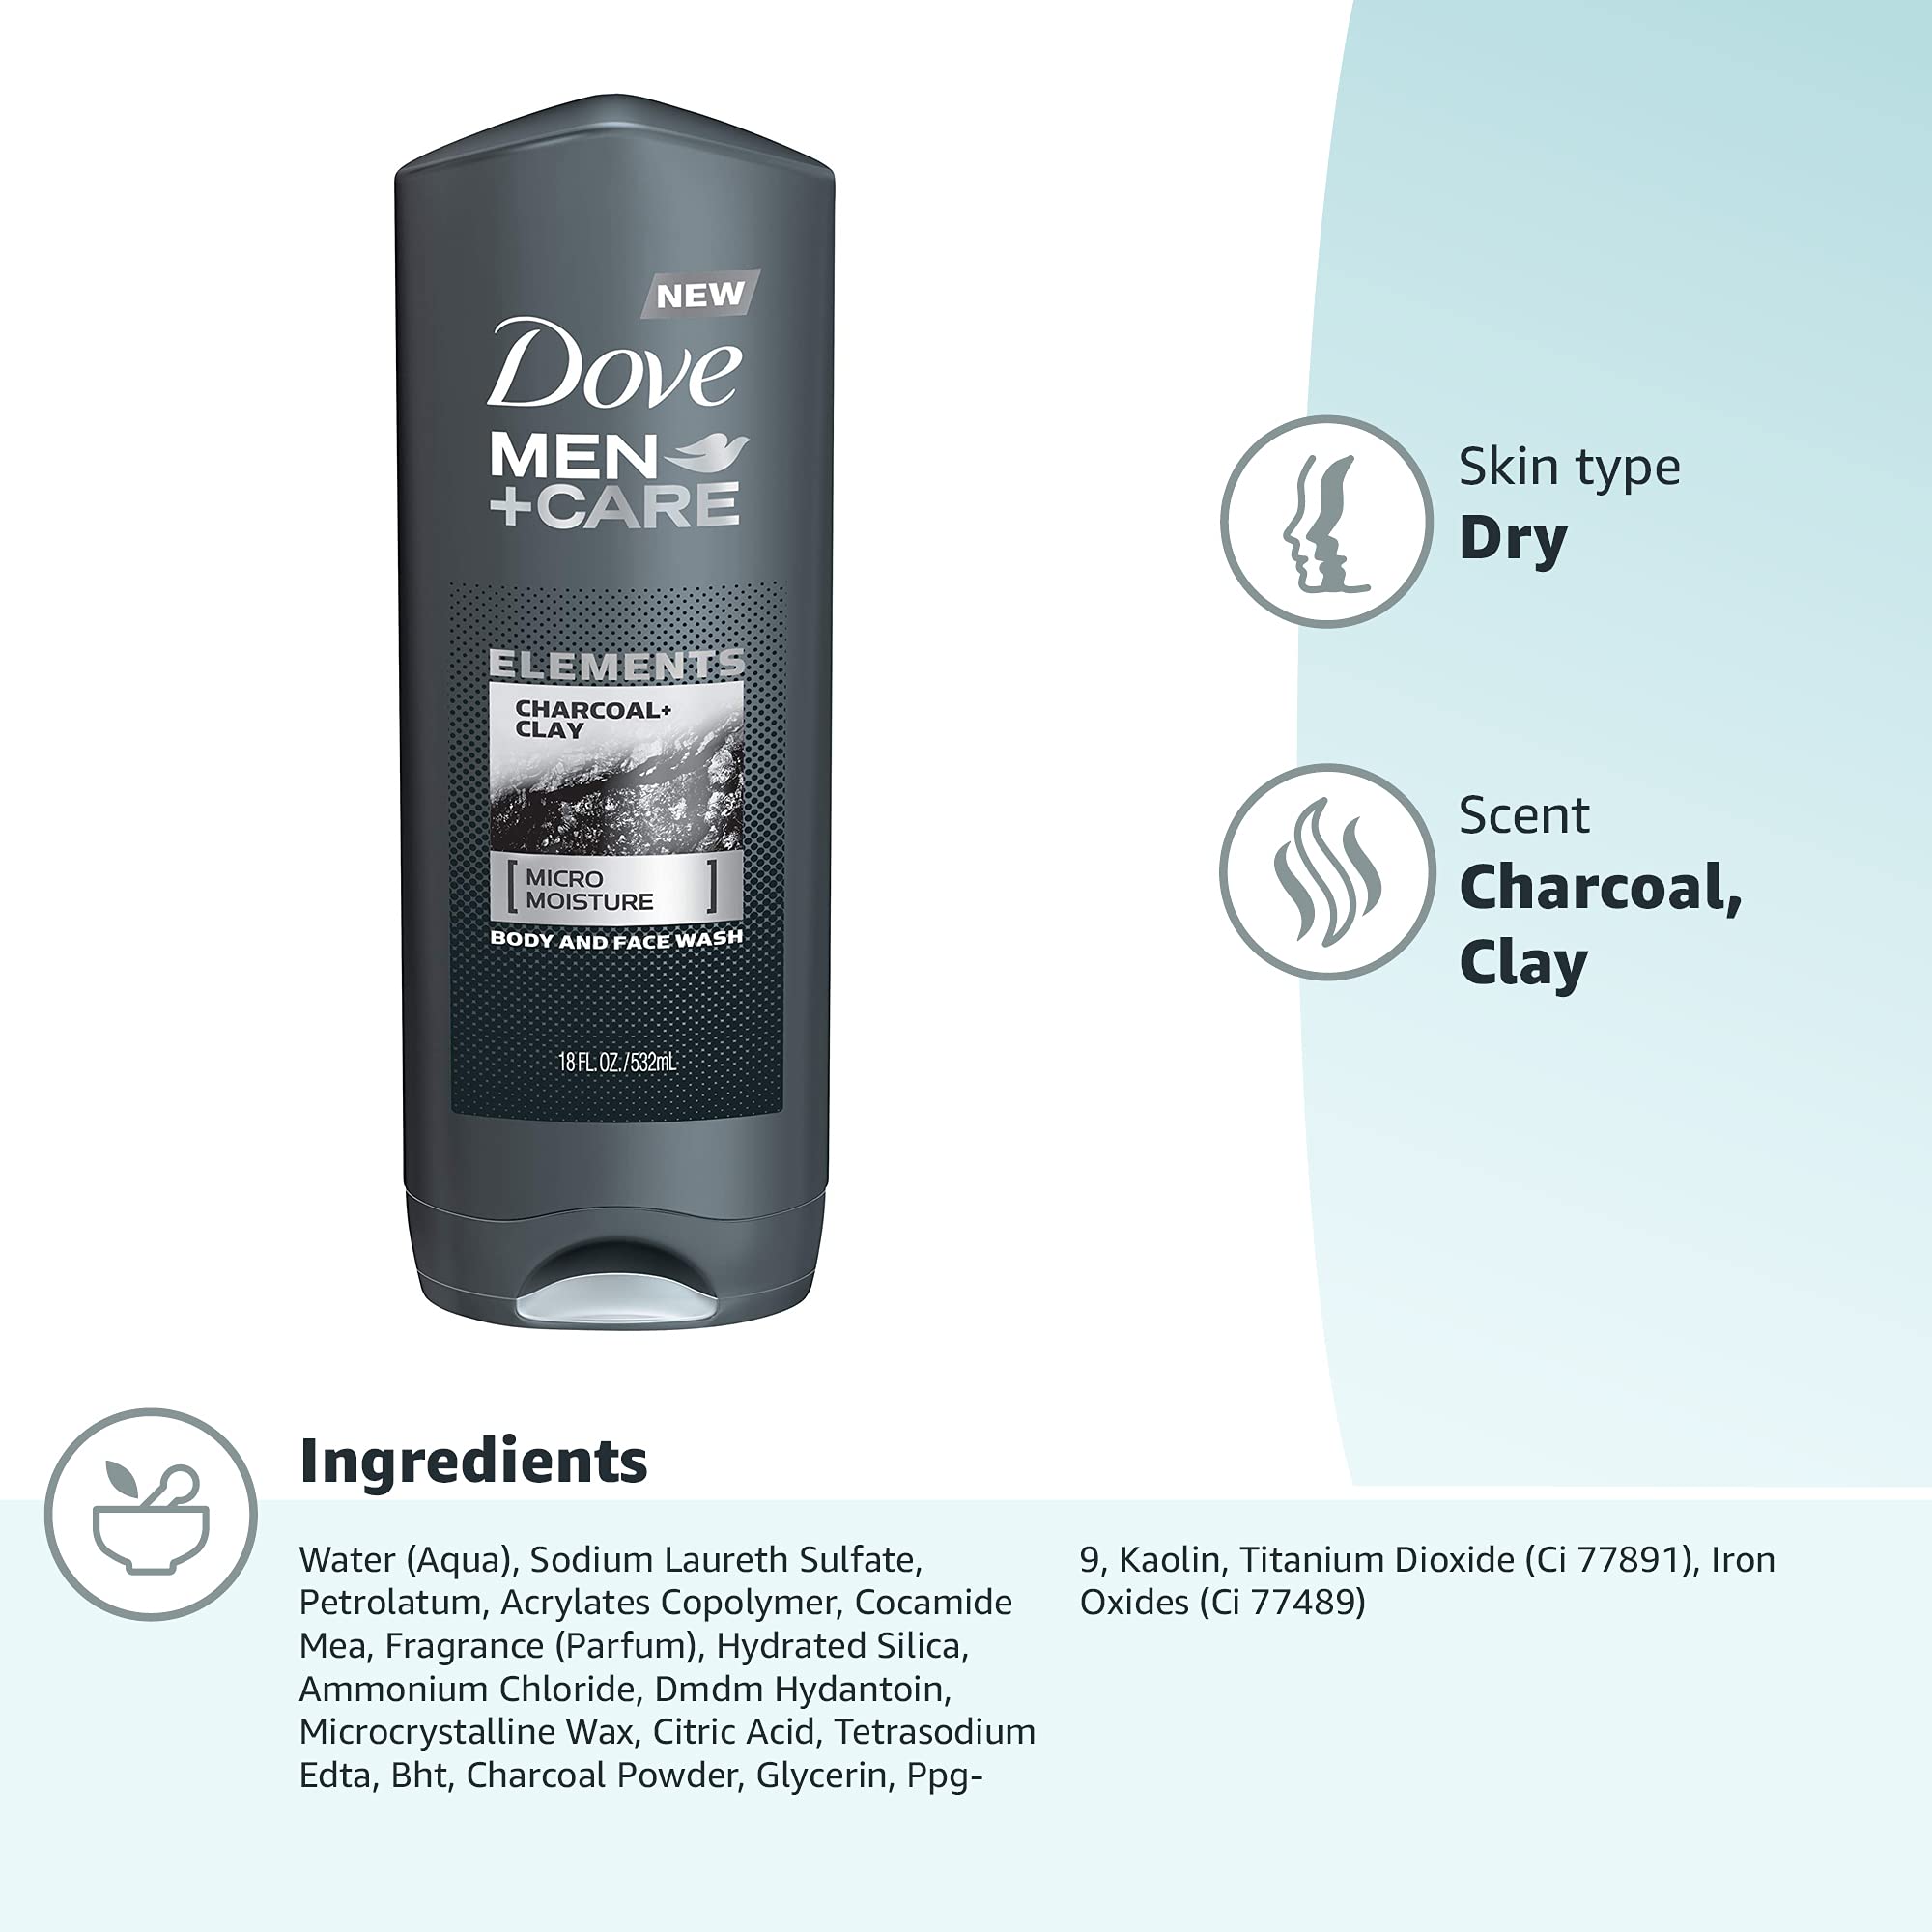 DOVE MEN + CARE Elements Body Wash Charcoal + Clay, Effectively Washes Away Bacteria While Nourishing Your Skin, Gray, 18 Fl Oz (Pack of 4)